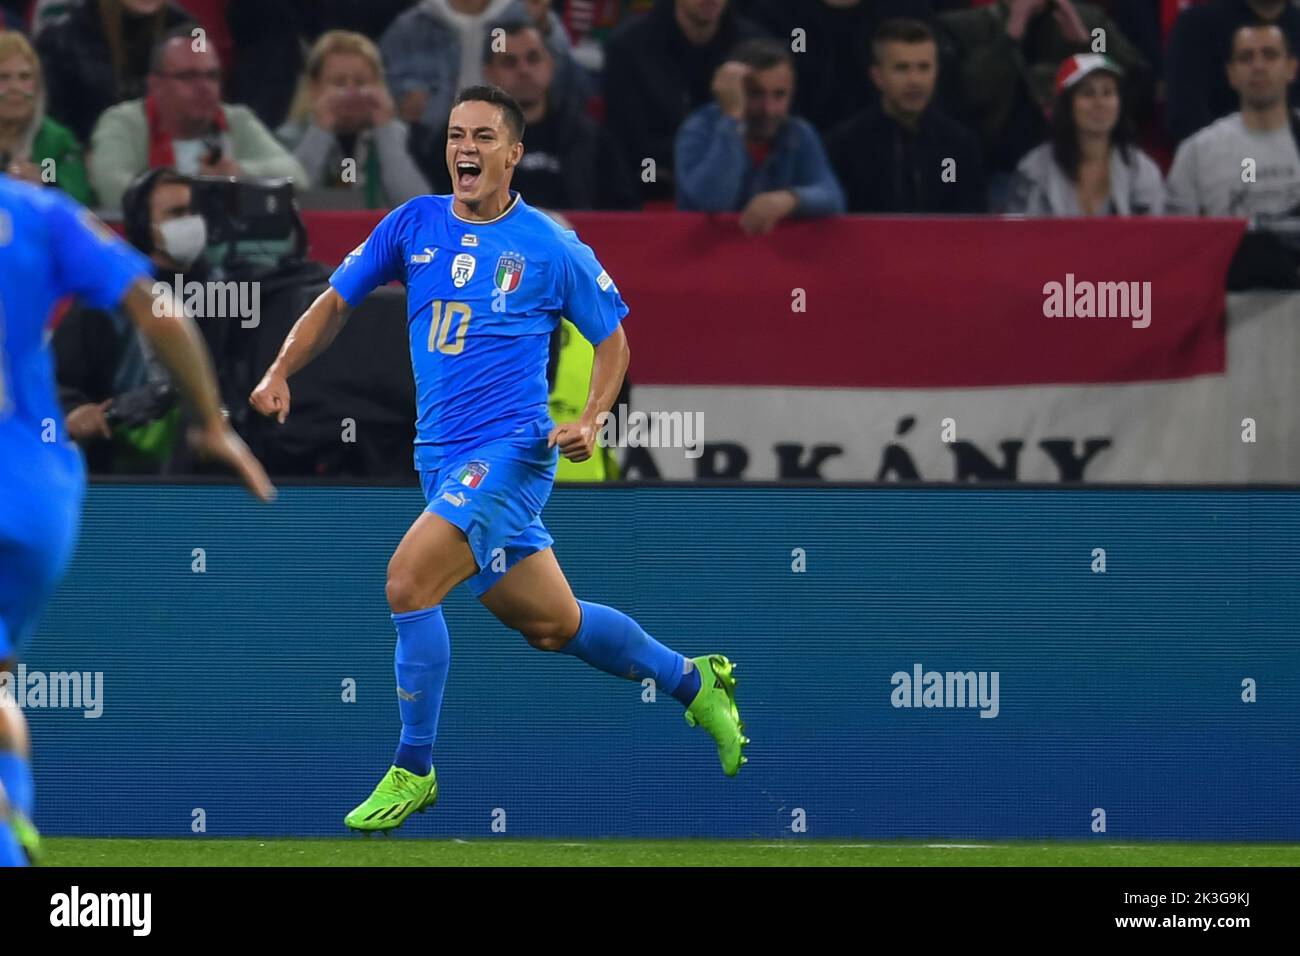 Budapest, Hungary, September 26, 2022, Giacomo Raspadori (Italy) celebrates after scoring his team's first goal during the UEFA 'Nations League 2022-2023' match between Hungary 0-2 Italy at Puskas Arena on September 26, 2022 in Budapest, Hungary. Credit: Maurizio Borsari/AFLO/Alamy Live News Stock Photo